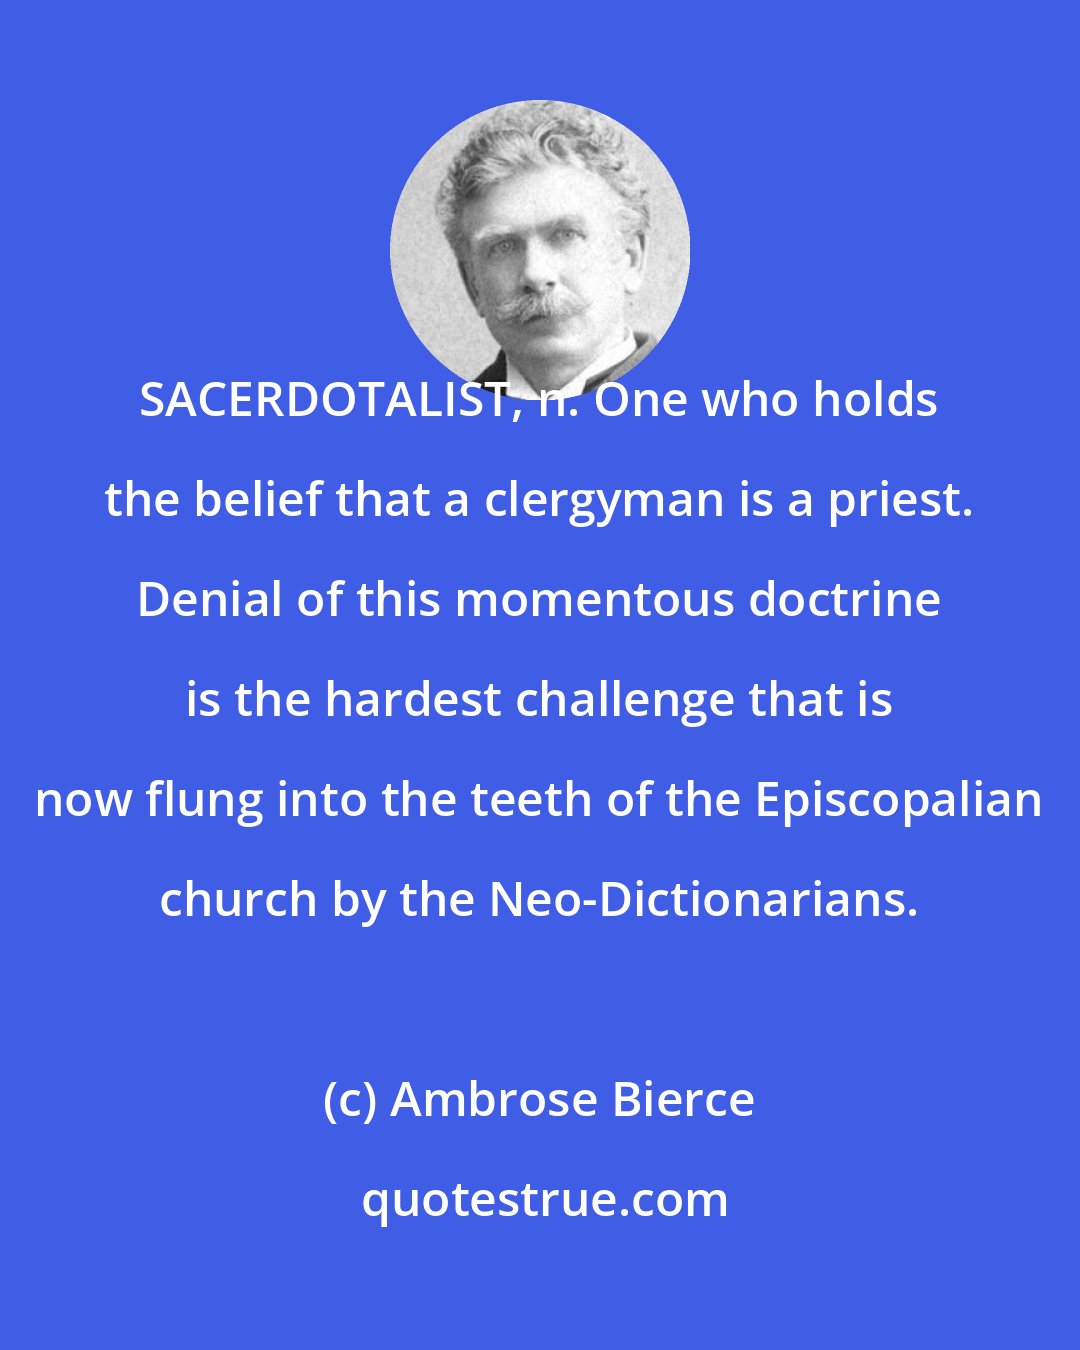 Ambrose Bierce: SACERDOTALIST, n. One who holds the belief that a clergyman is a priest. Denial of this momentous doctrine is the hardest challenge that is now flung into the teeth of the Episcopalian church by the Neo-Dictionarians.